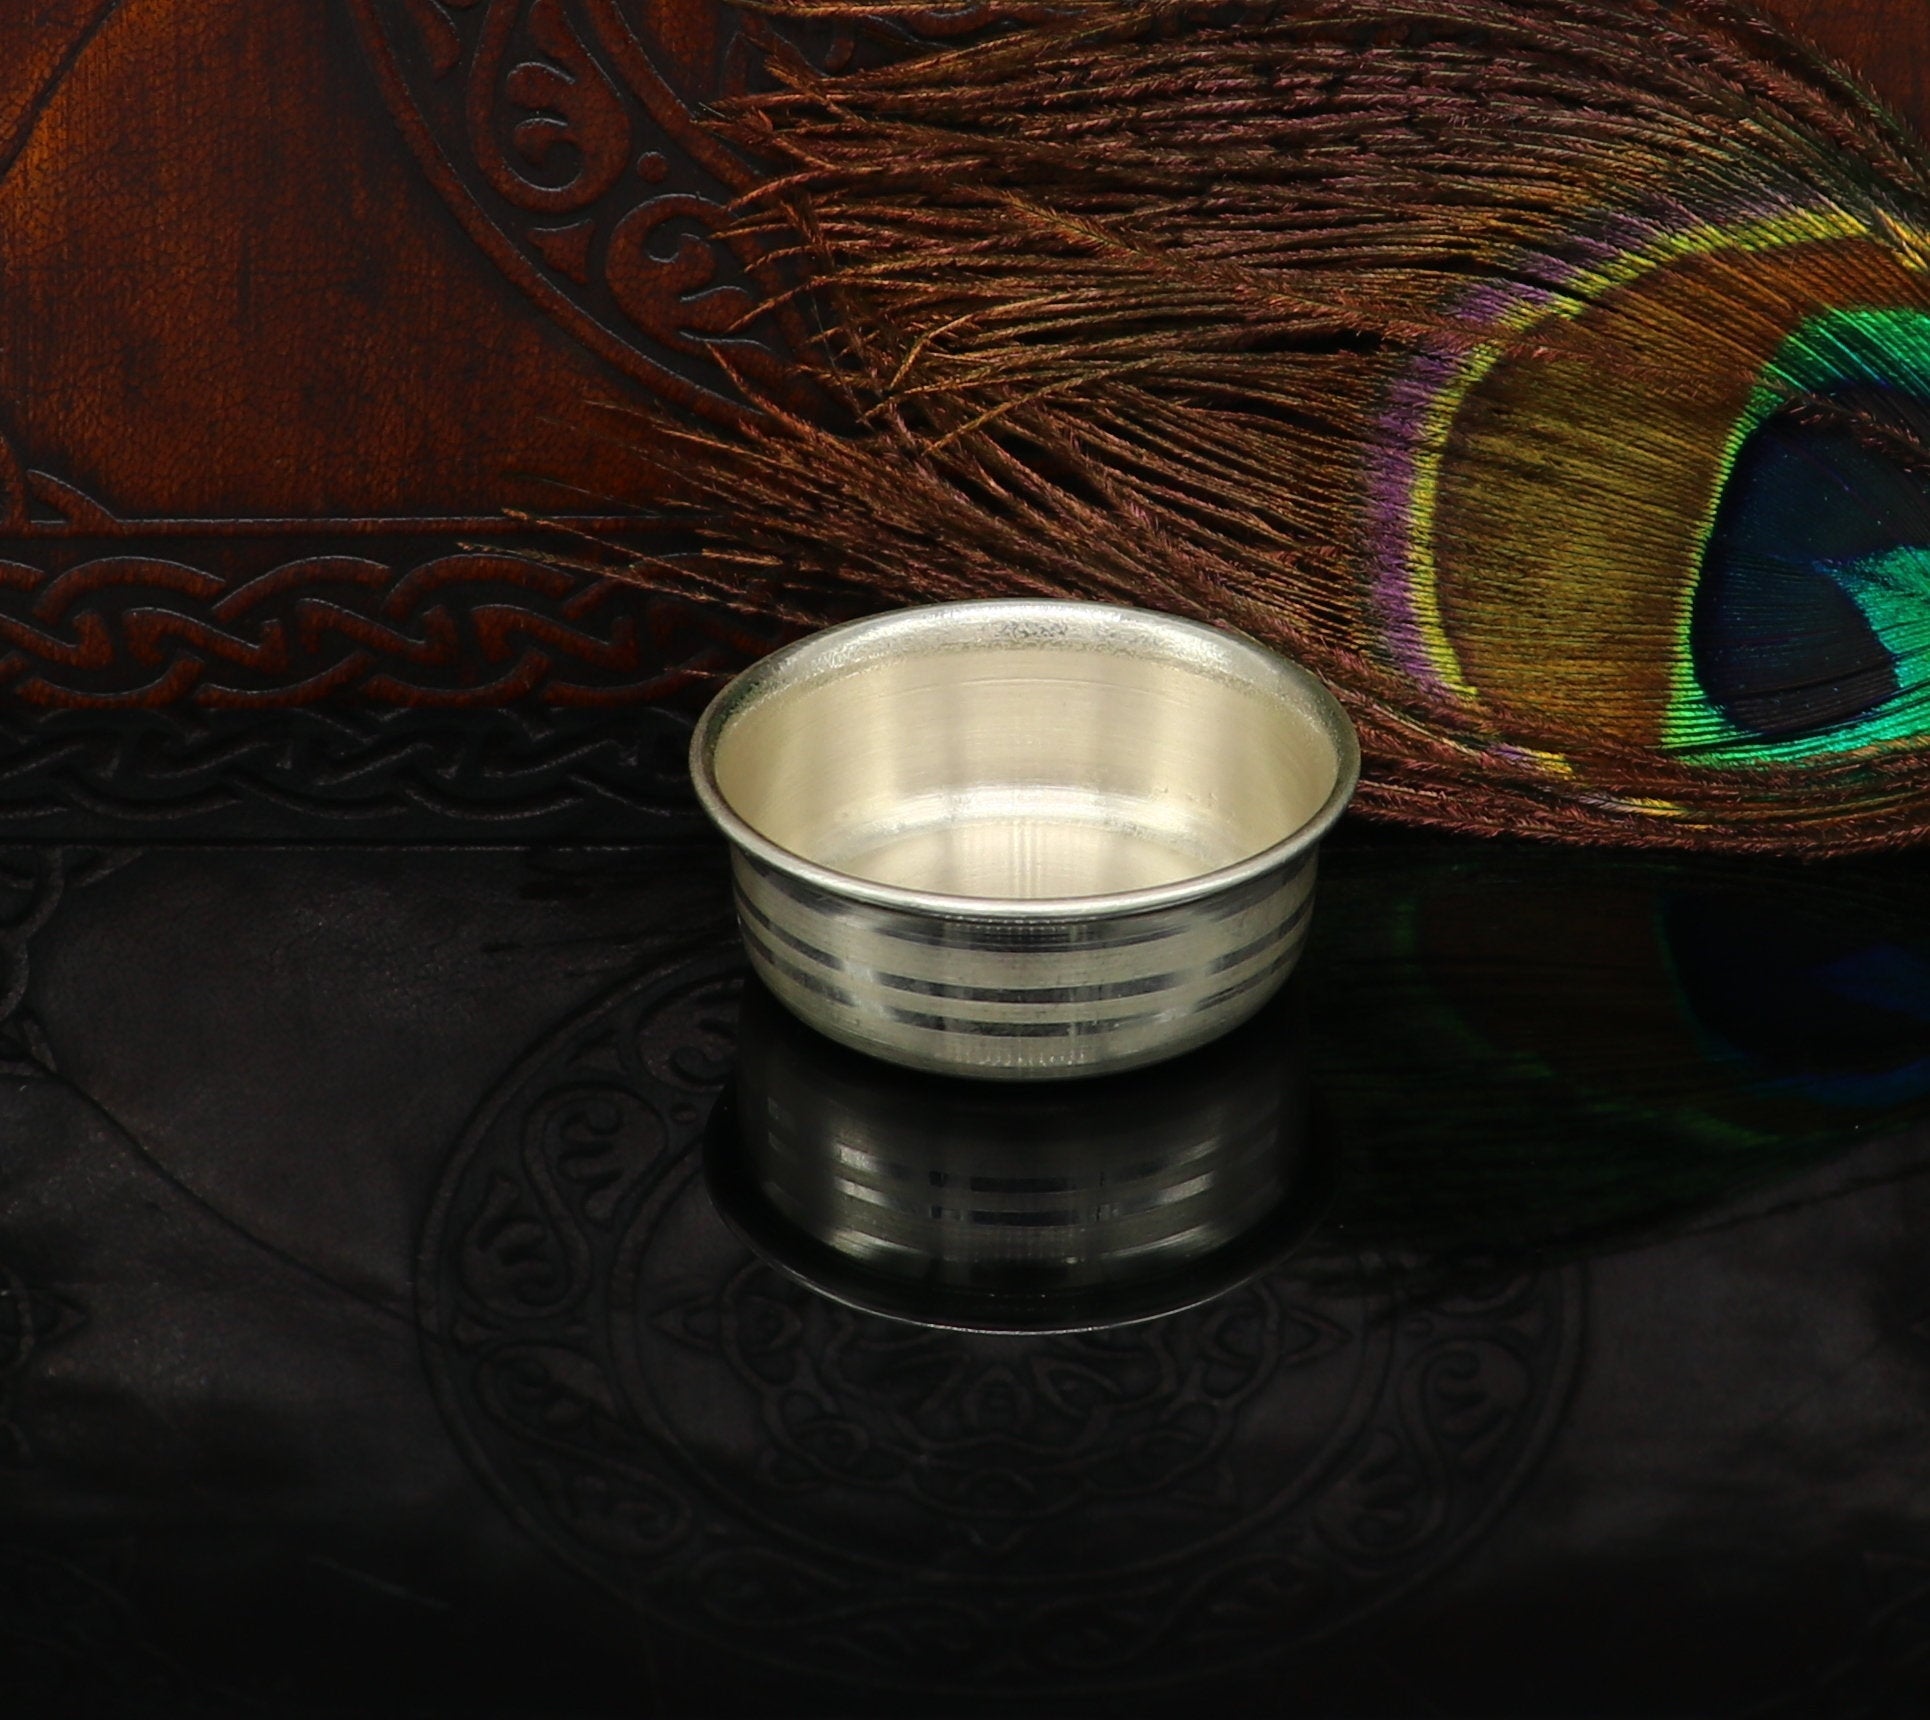 999 fine solid silver handmade small bowl for baby or temple puja, pure silver vessels, silver utensils, temple accessories india sv103 - TRIBAL ORNAMENTS